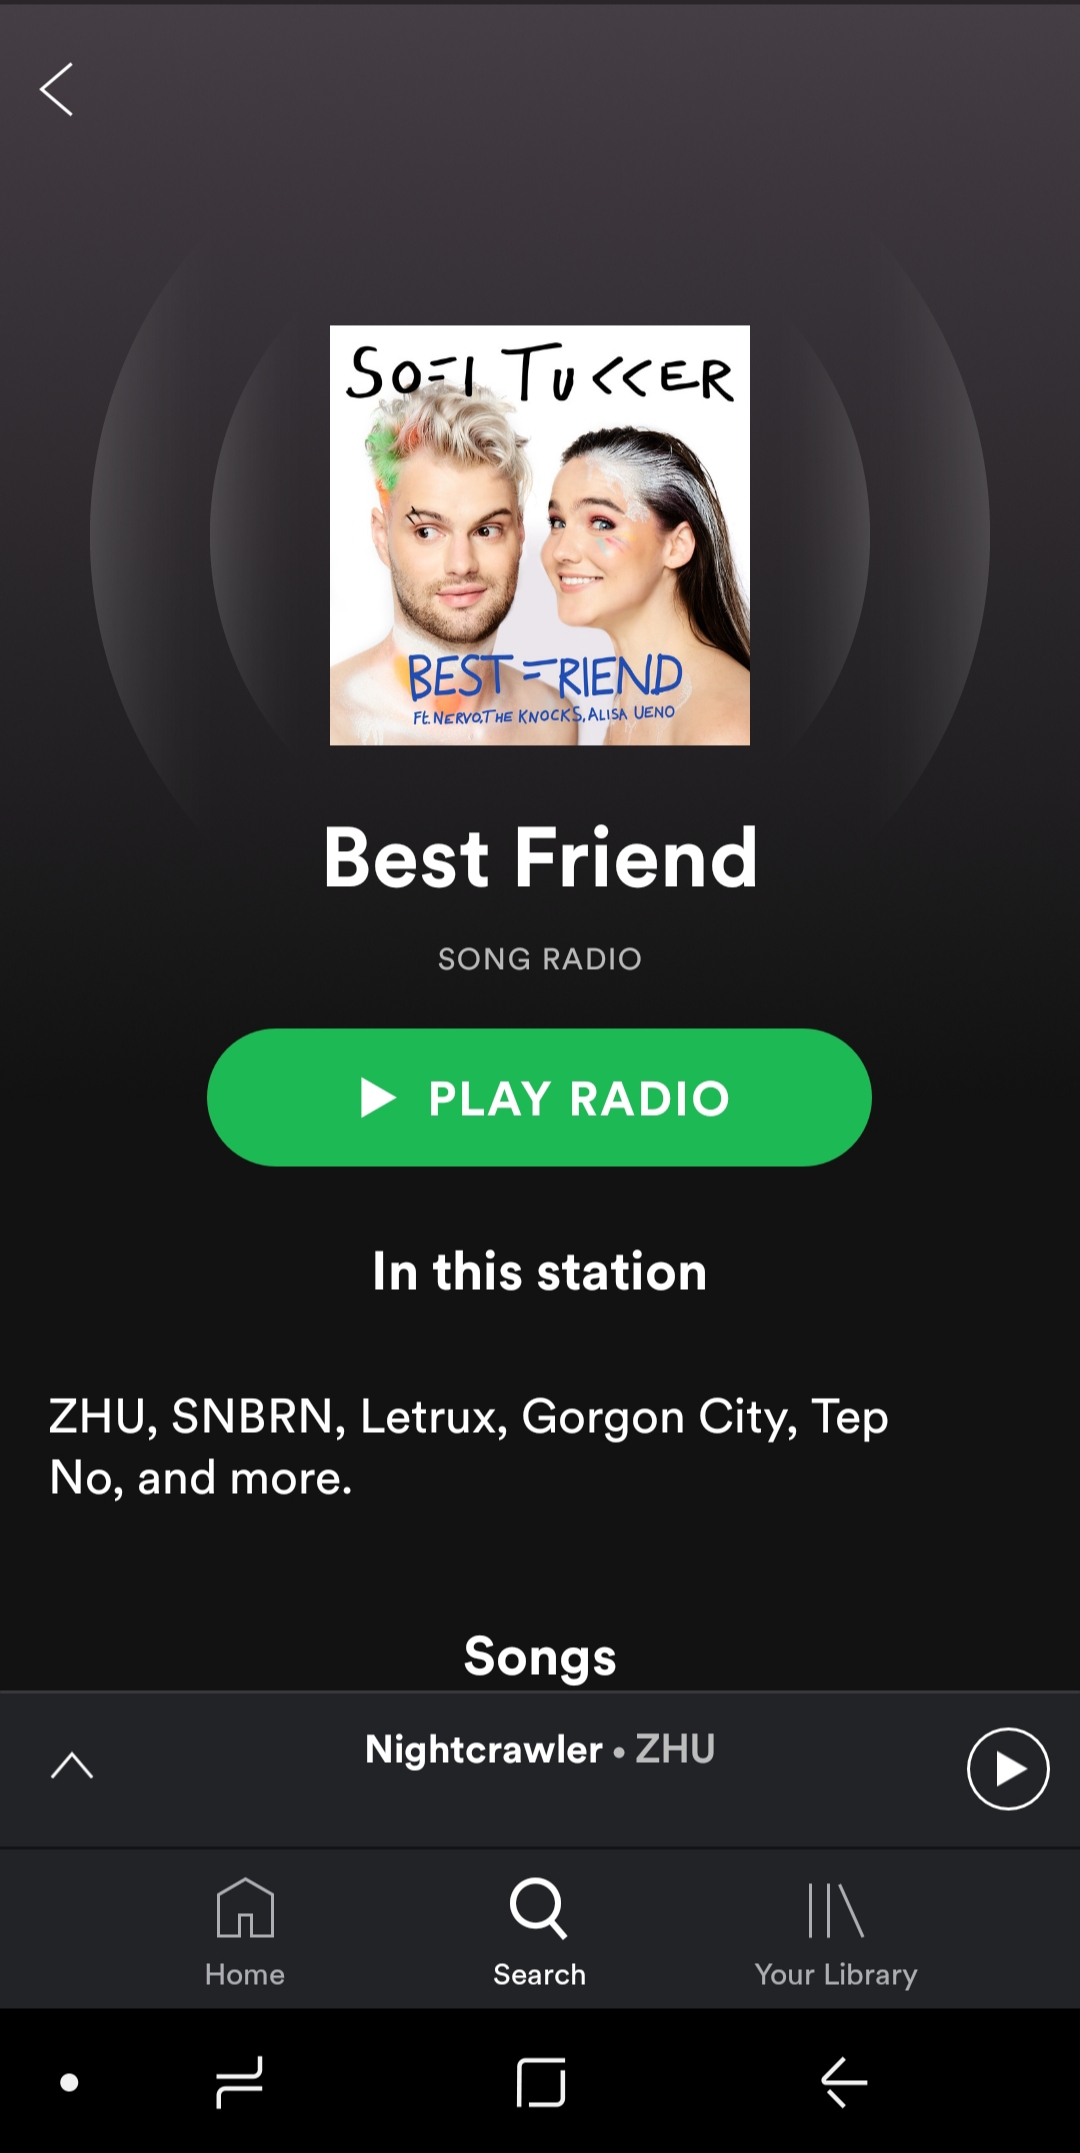 Follow button disappeared from radio station page - The Spotify Community